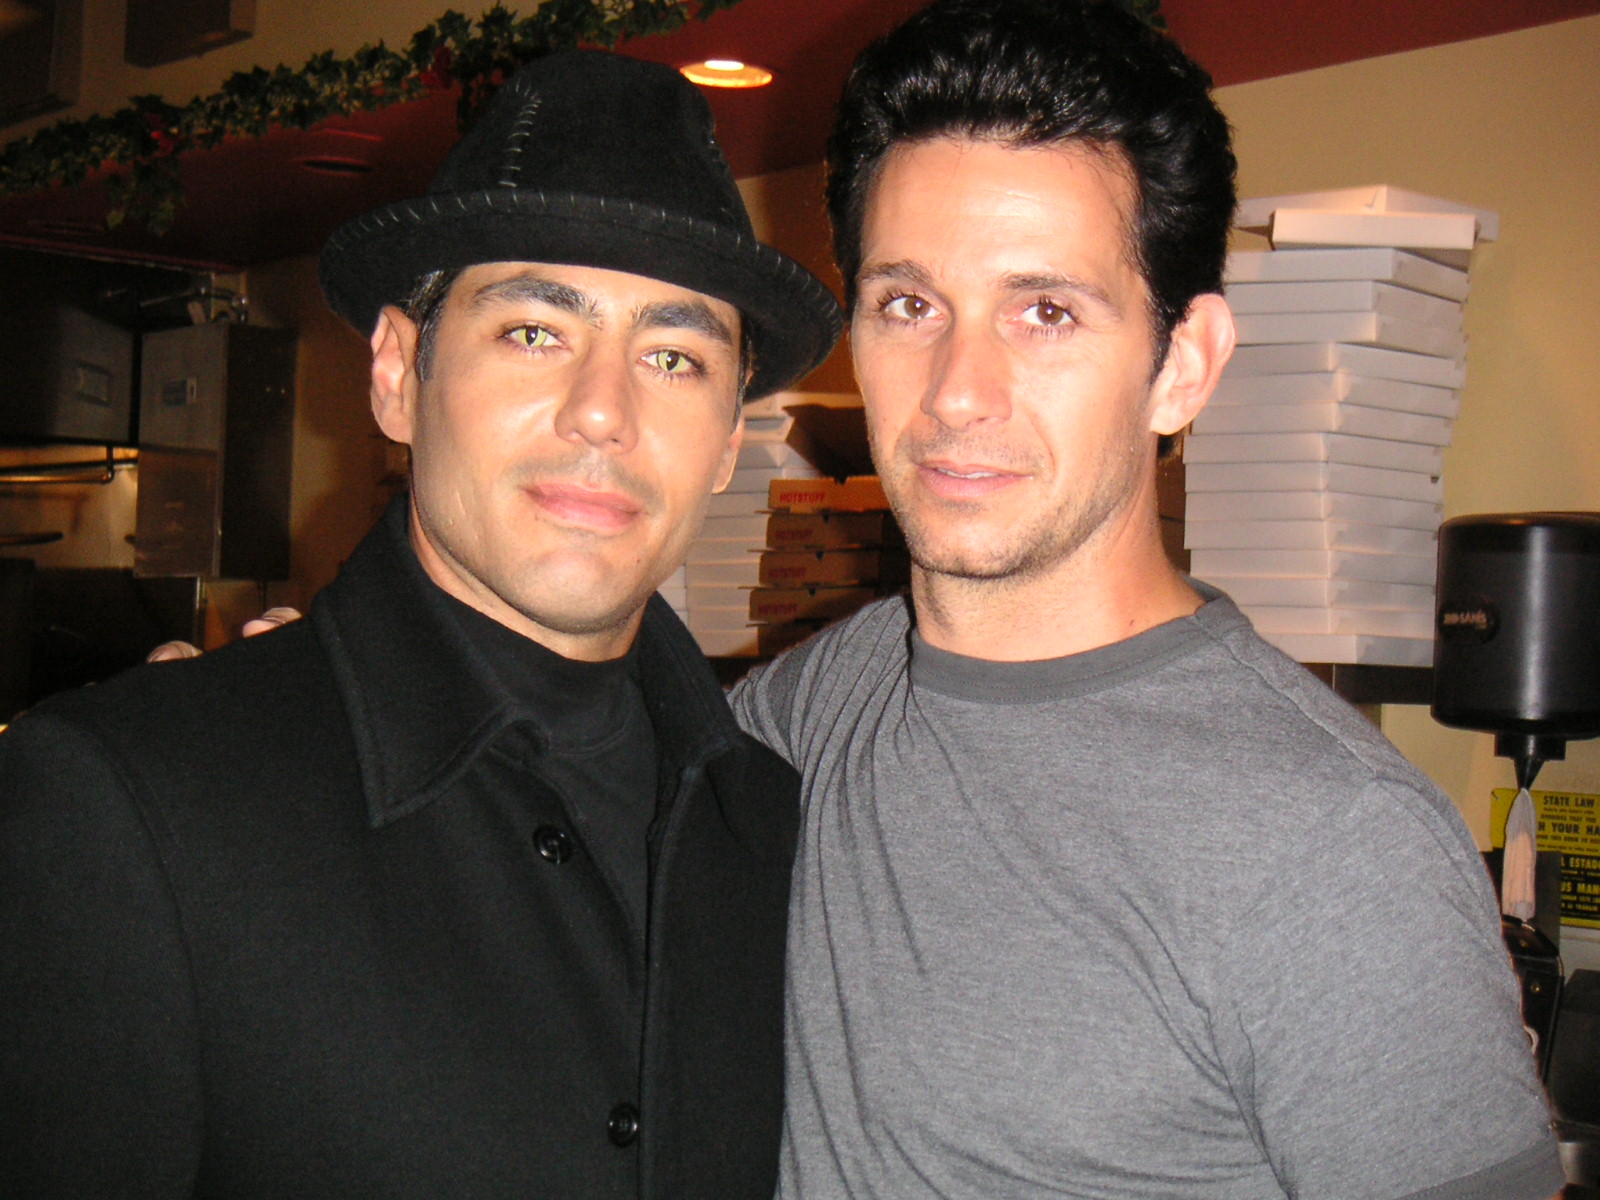 Pizza With Bullets Danny Nucci & Ronnie Marmo Character: Freddie 'The Cat' Pagano & Johnny Casanova